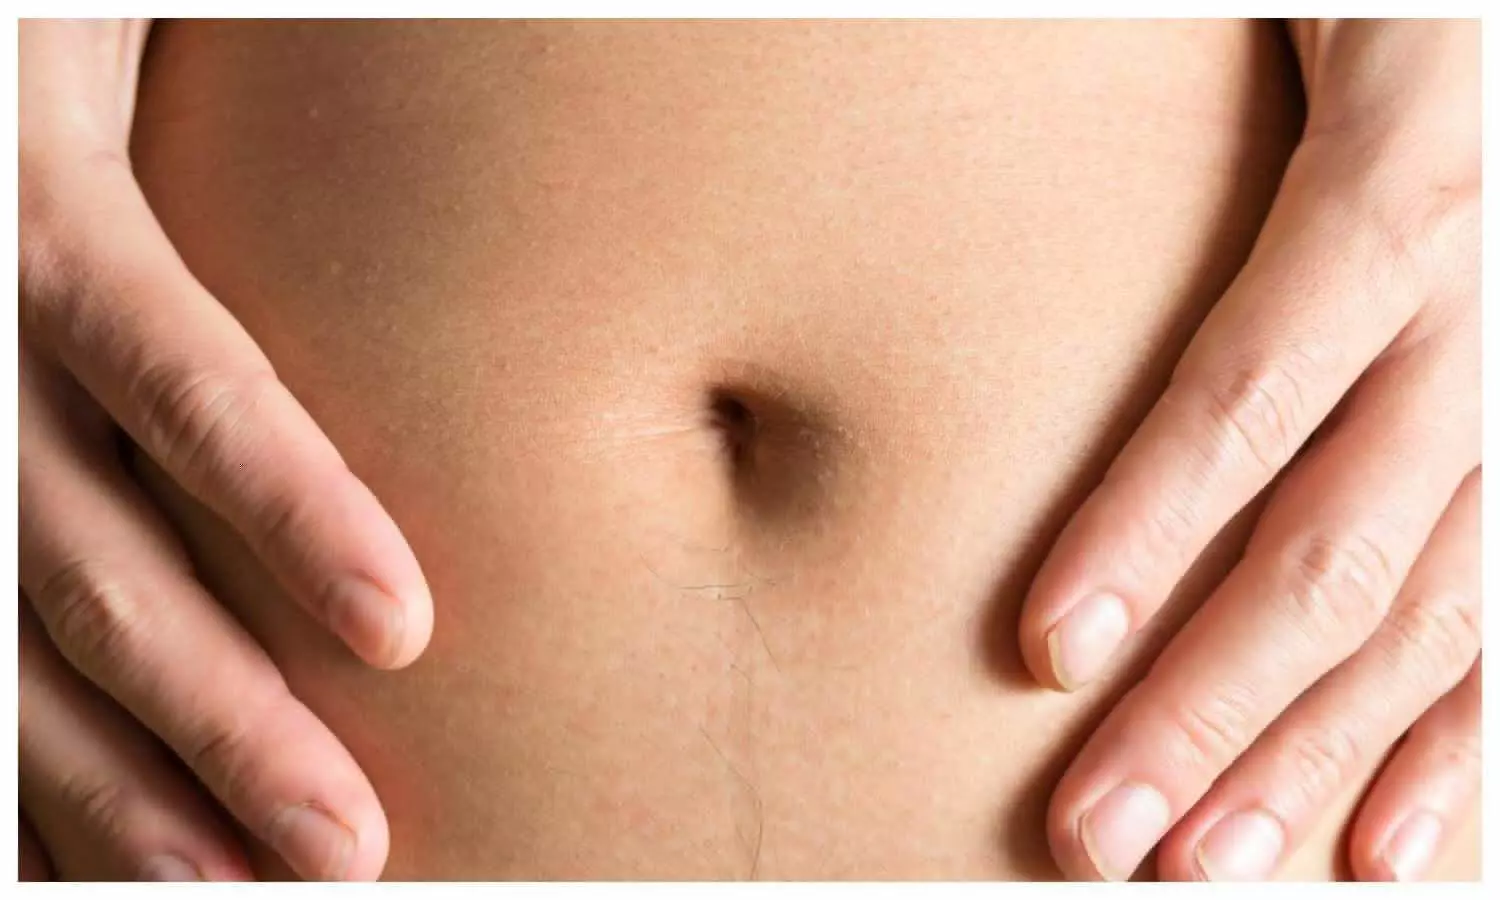 Belly Button a Health Indicator